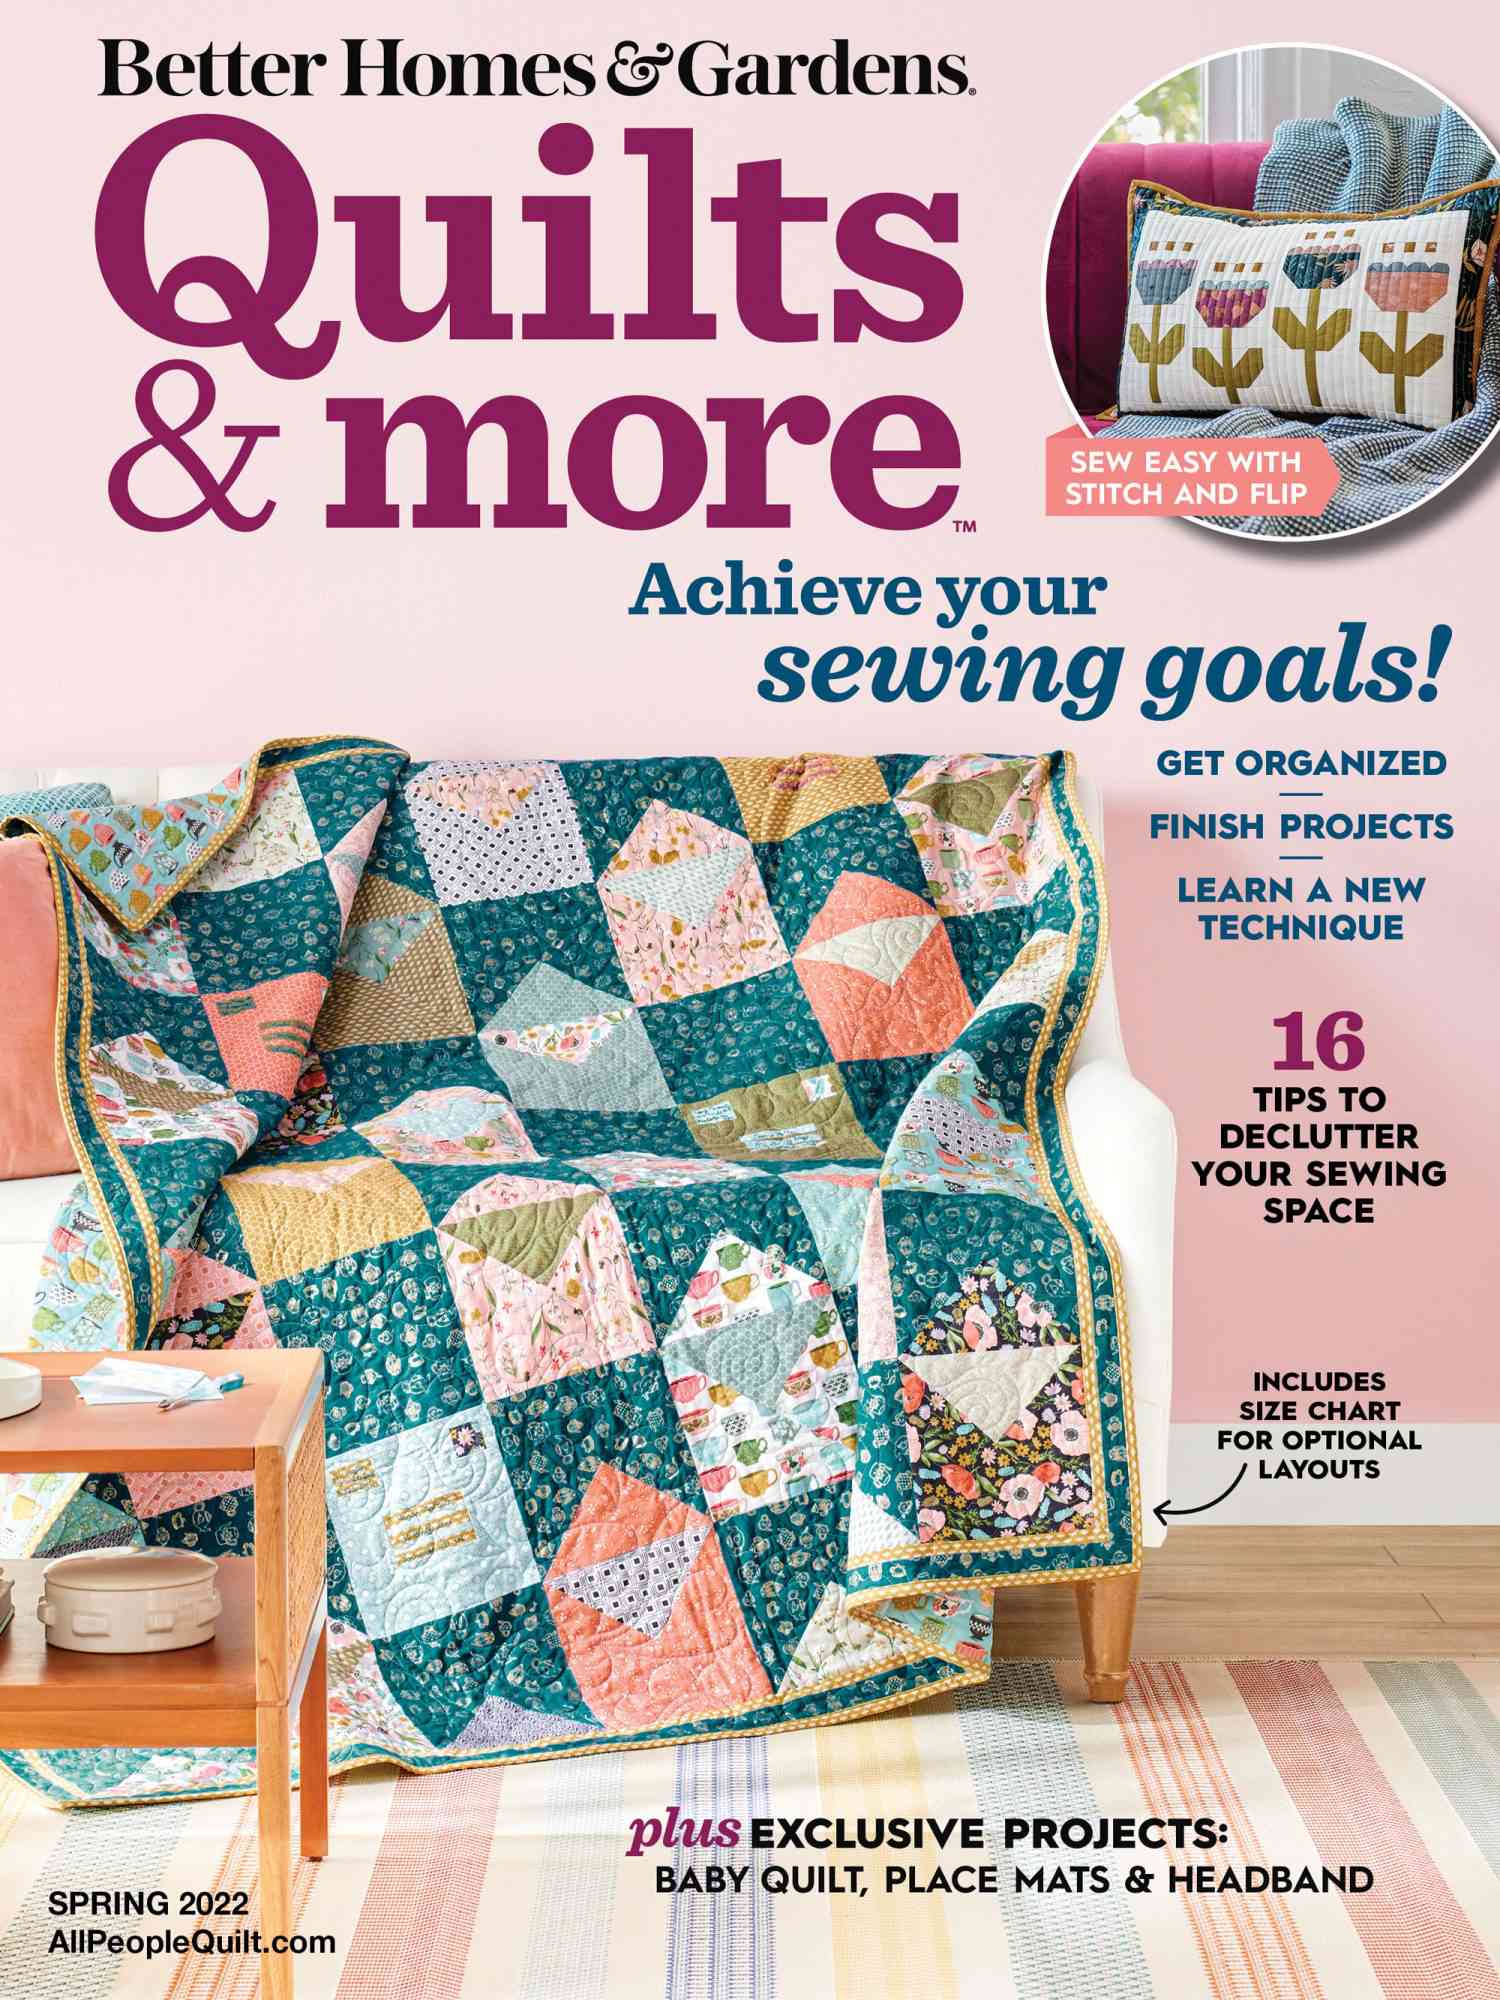 Kit, Quilty Sewing Machine Cover & Mat + Complete Pattern Book by Lori Holt